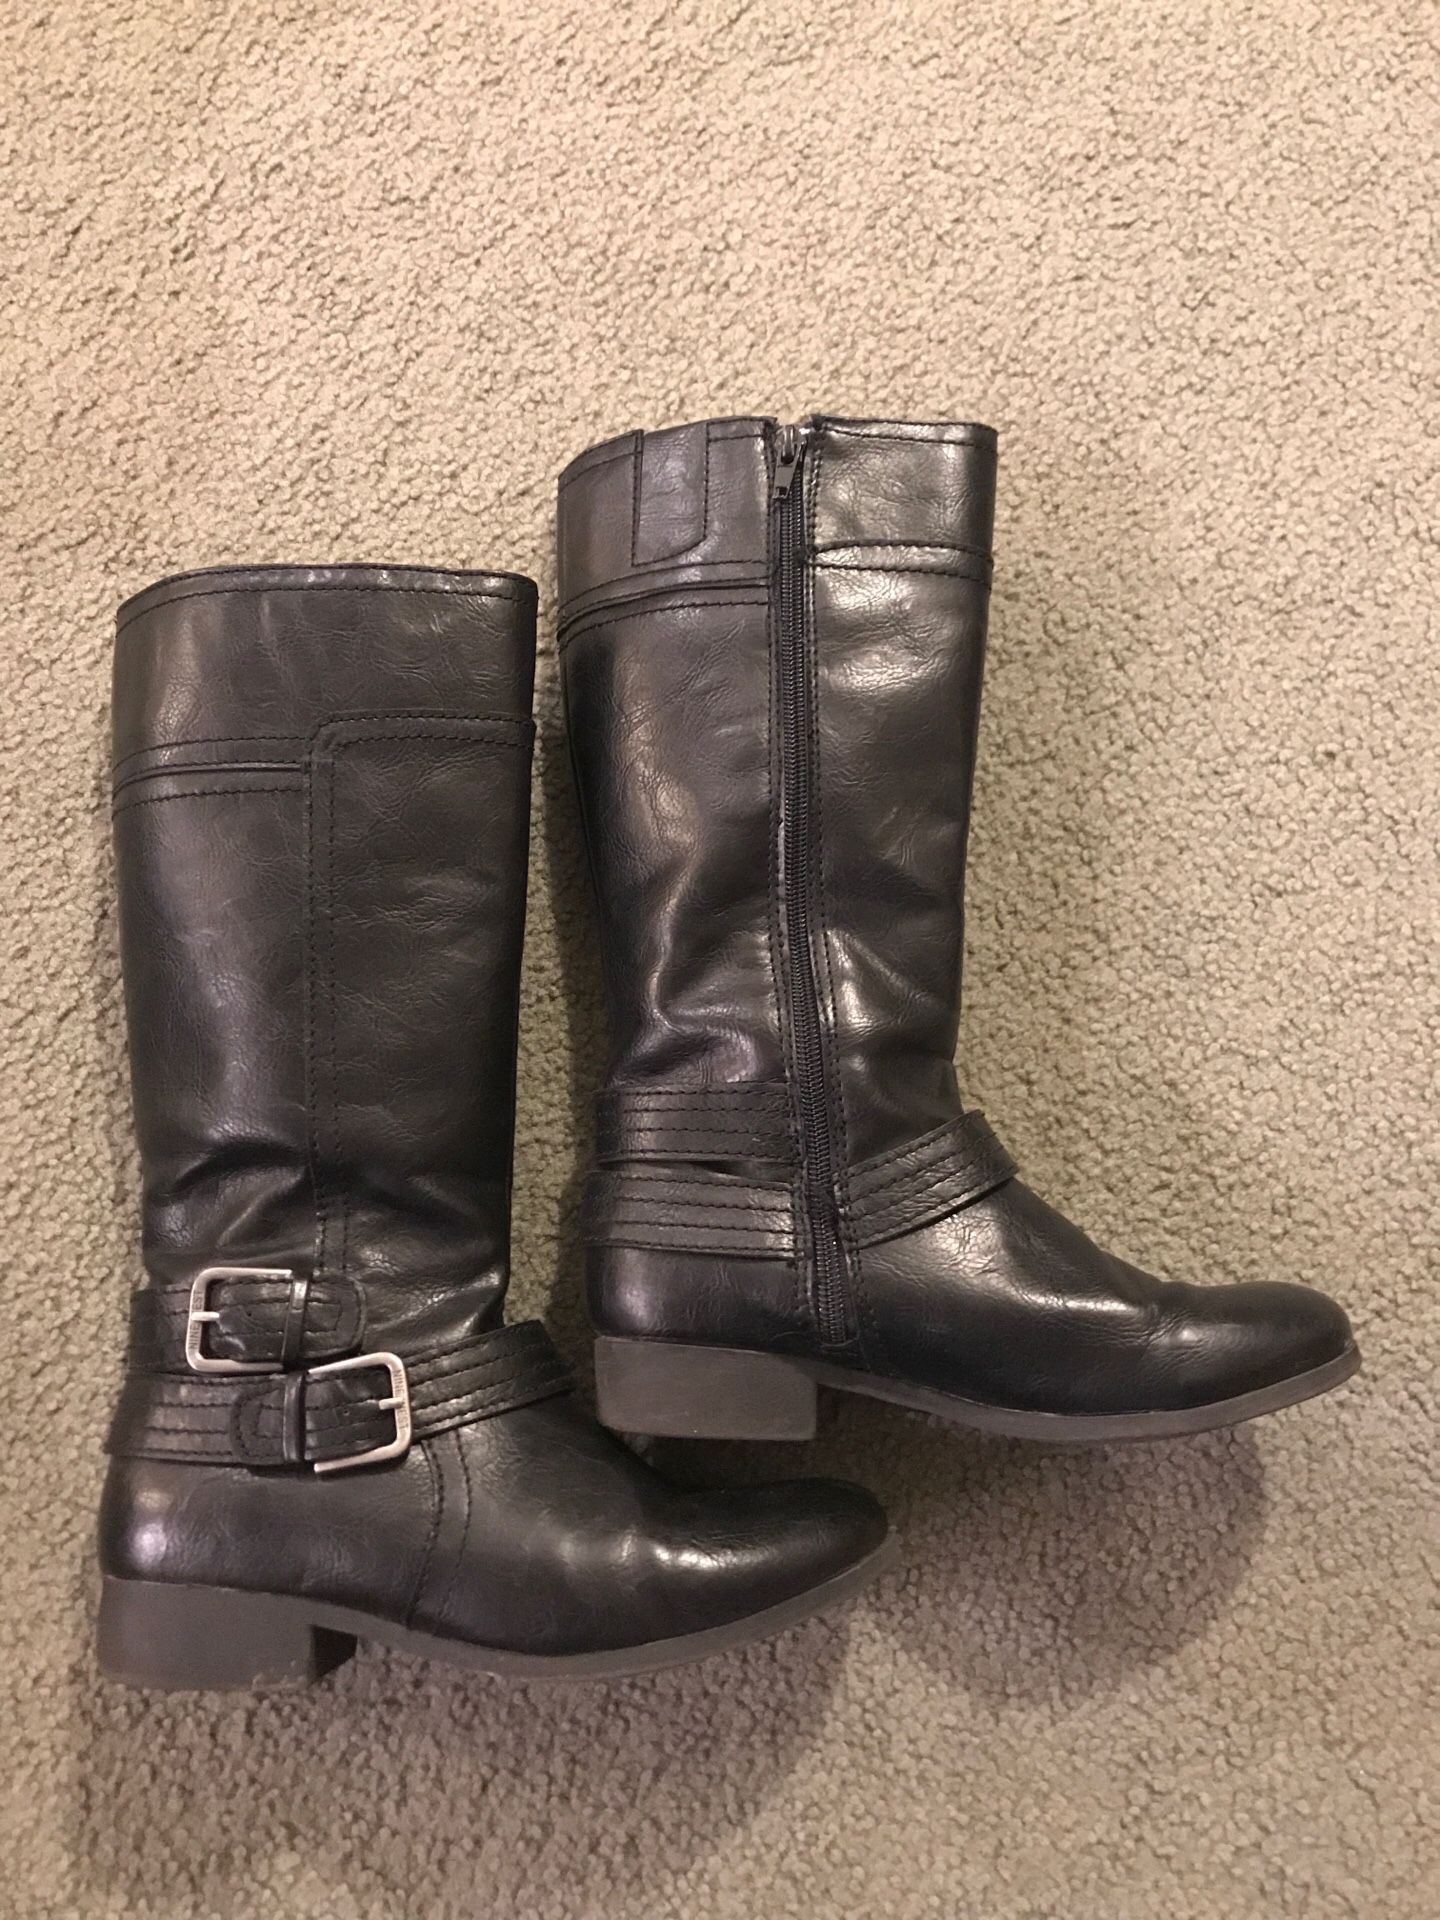 Nine West girls boots size 3